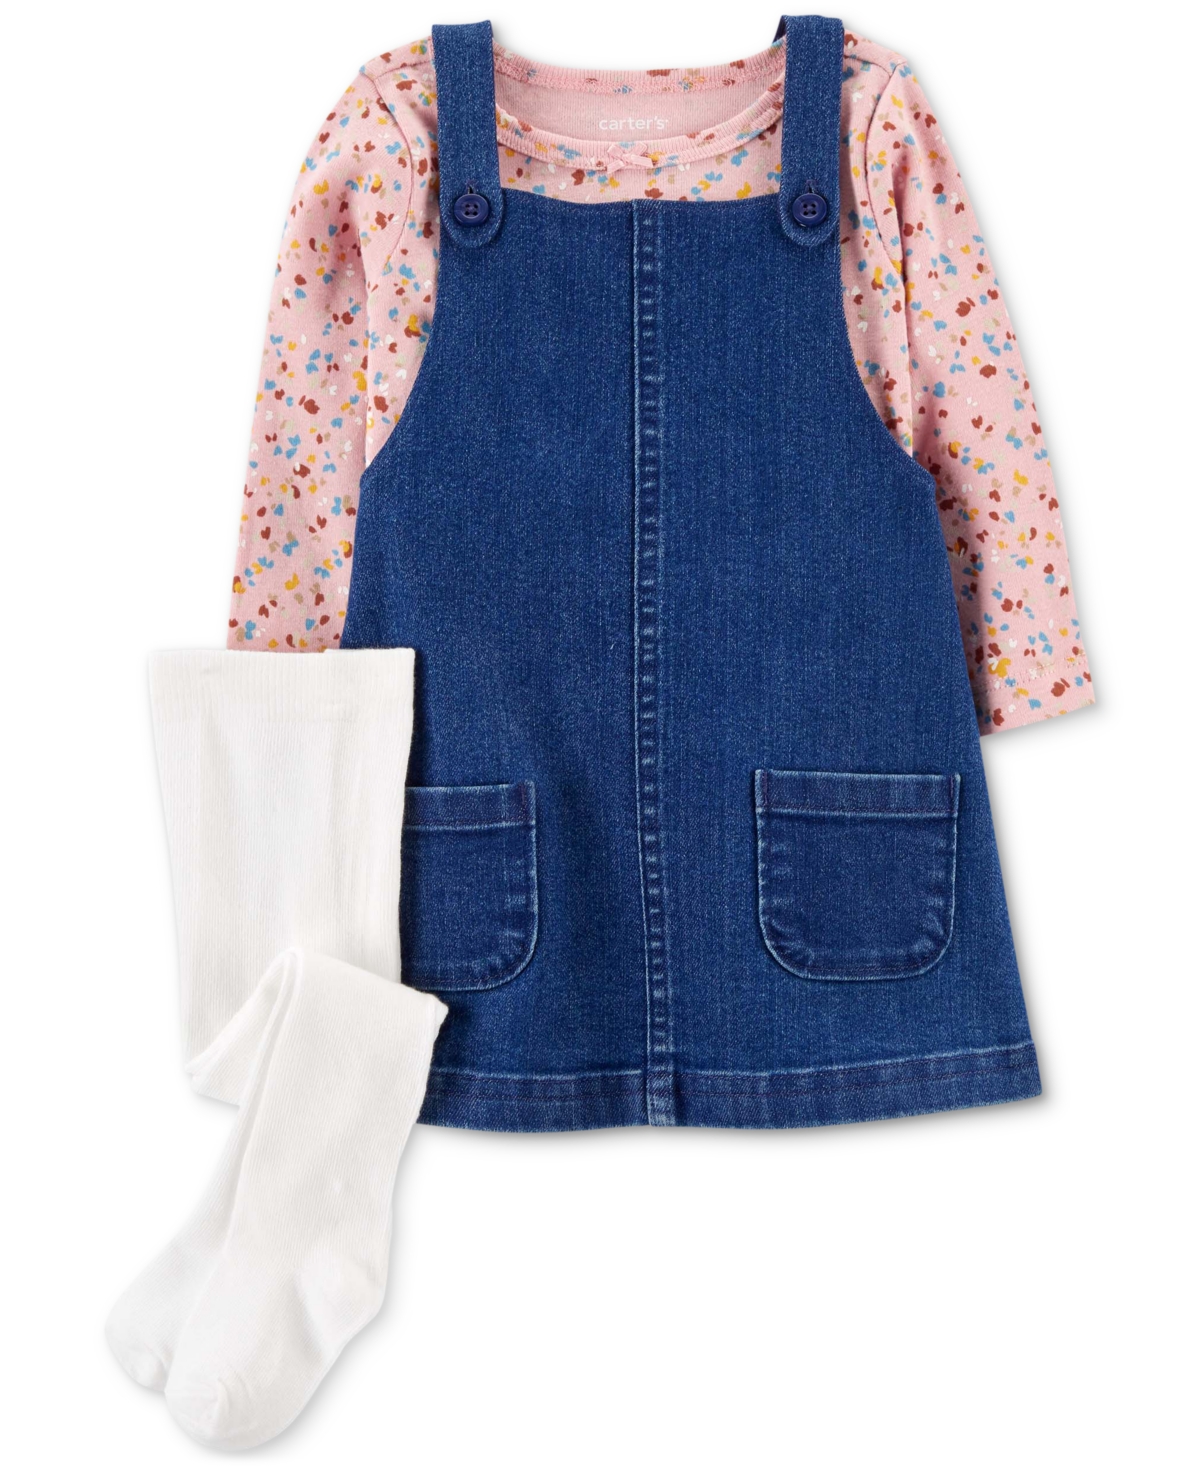 Carter's Baby Girls 3-pc. Floral Top, Chambray Jumper & Tights Set In Denim